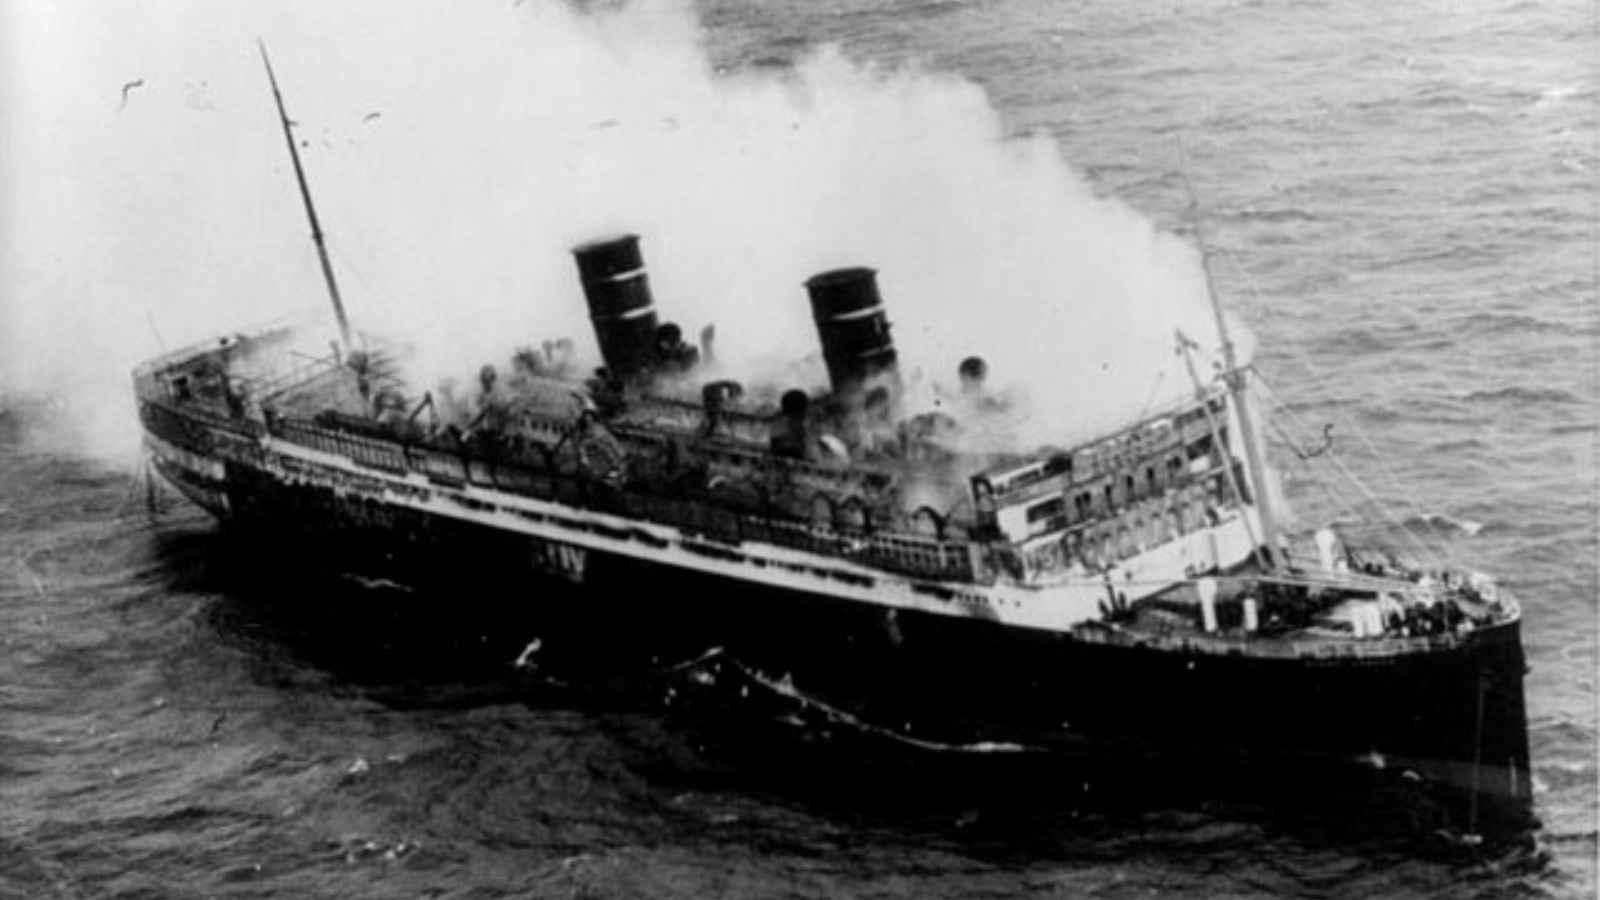 <p class="text-body font-regular text-gray-800 leading-[24px] pt-[9px] pb-[2px]">On the night of September 7th, 1934, the SS Morro Castle caught fire just off the coast of New Jersey. The ship had departed from Havana on its return journey to New York when a fire broke out in the first-class writing room. The crew was unable to contain the fire, which quickly spread throughout the ship due to high winds.</p><p class="text-body font-regular text-gray-800 leading-[24px] pt-[9px] pb-[2px]">The disaster was made worse by the fact that many of the passengers and crew were unprepared for such an emergency. The captain of the SS Morro Castle had not conducted proper safety drills and many of the lifeboats were not able to be released due to rust and disrepair. This led to a chaotic and panicked evacuation, resulting in the loss of 137 lives, and many passengers were left stranded on board as the fire engulfed the vessel.</p>